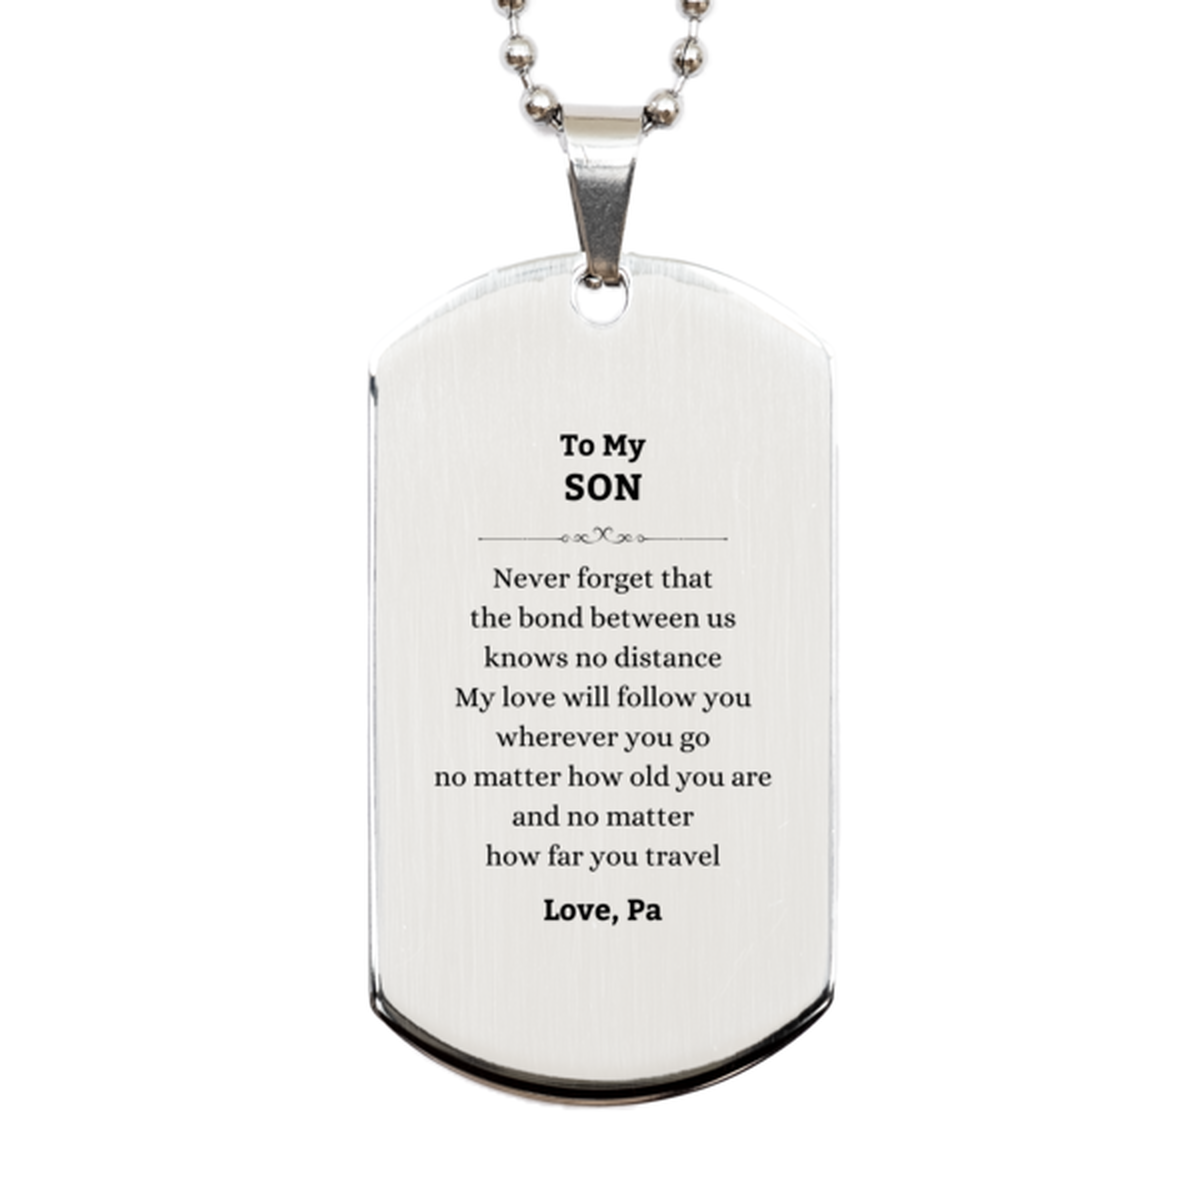 Son Birthday Gifts from Pa, Adjustable Silver Dog Tag for Son Christmas Graduation Unique Gifts Son Never forget that the bond between us knows no distance. Love, Pa